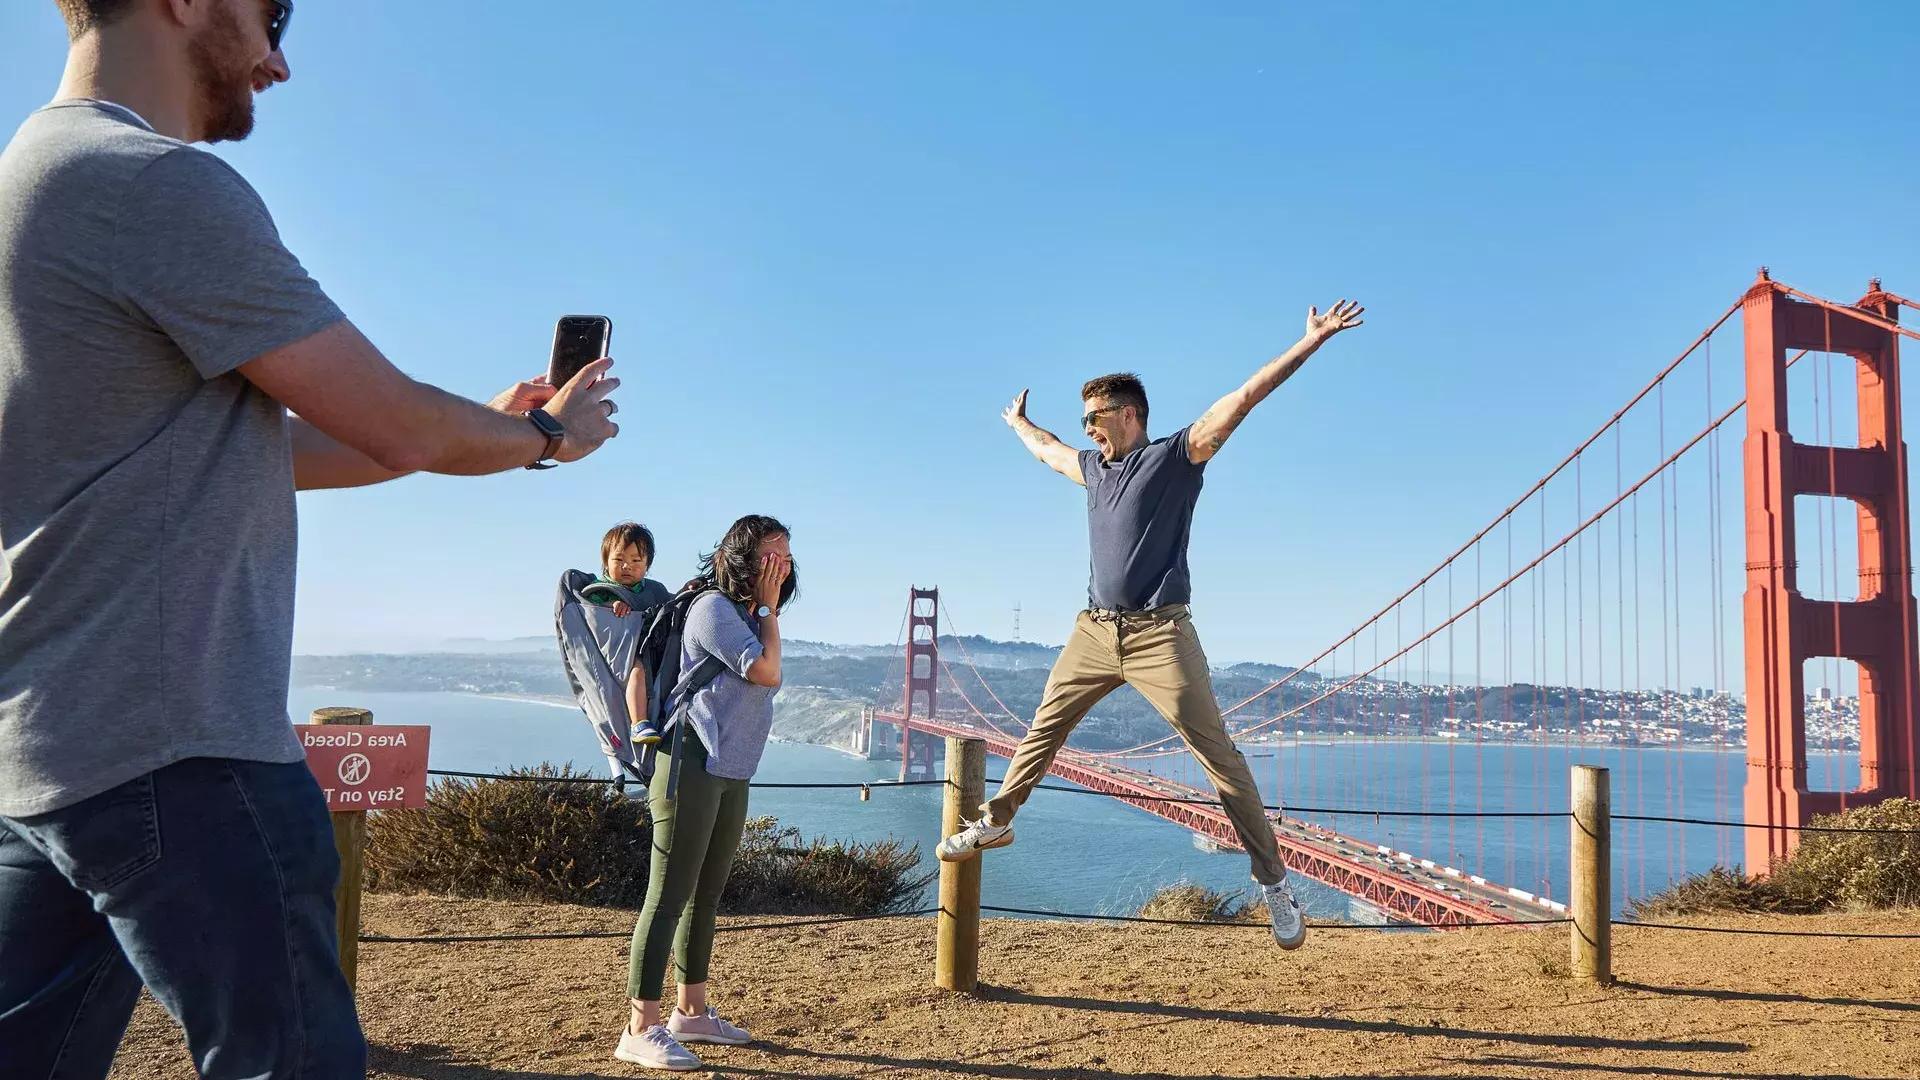 A group taking photos at the Golden Gate Bridge